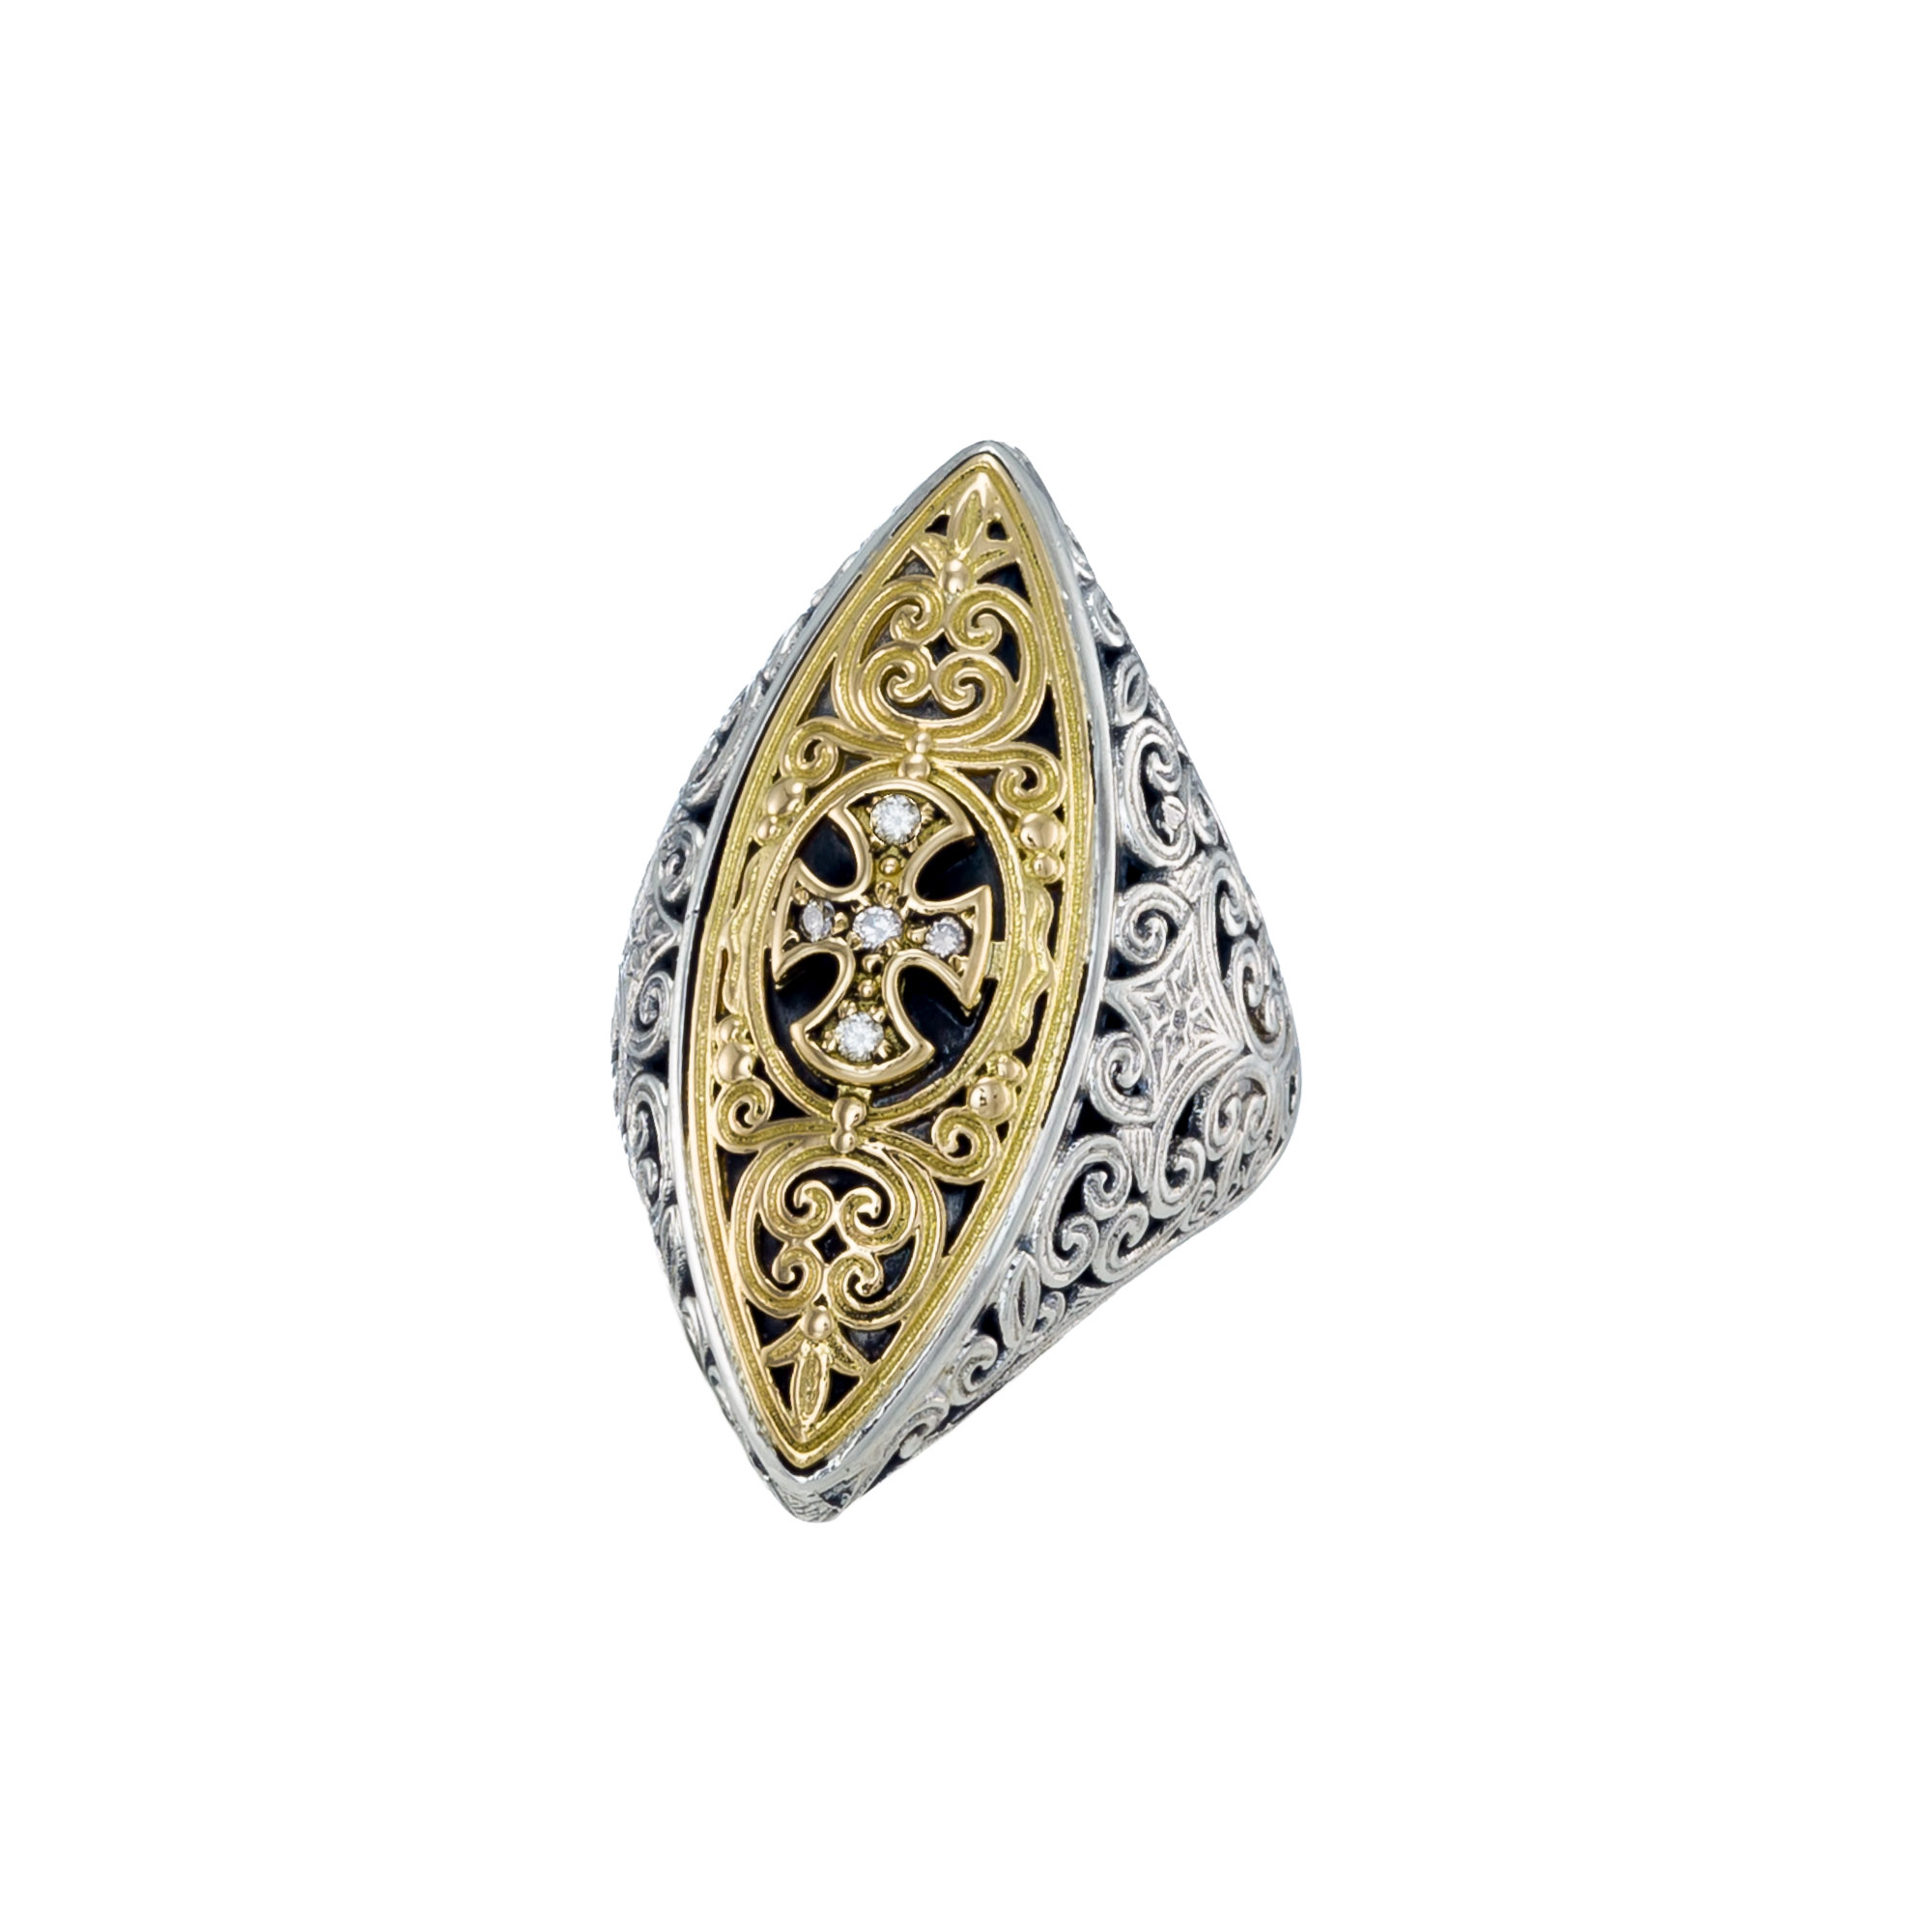 Faidra ring in 18K Gold and Sterling silver with precious stones